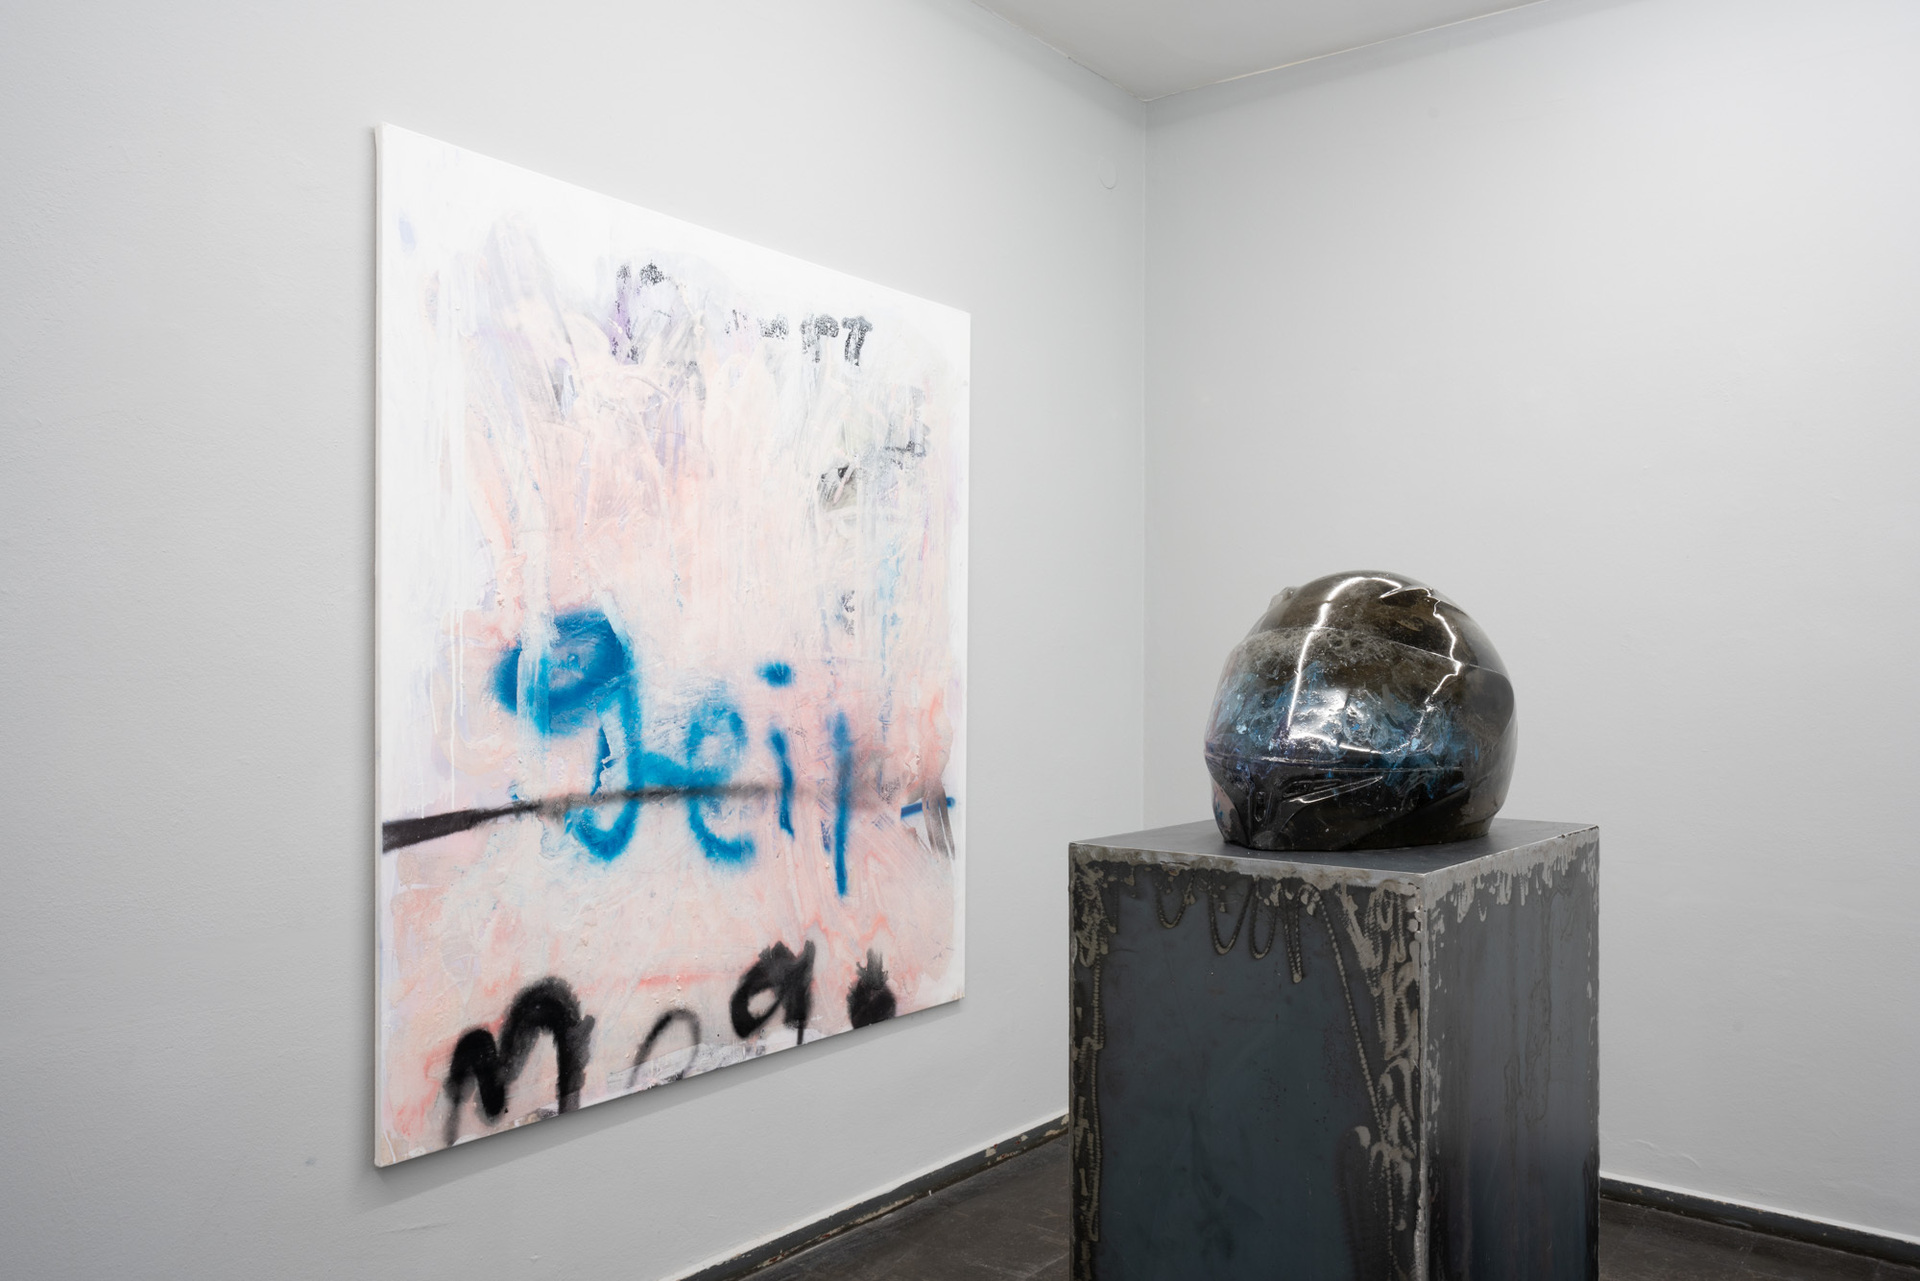 From left to right: 
 ALANA LAKE, Mega Geil, 2020,  Emulsion, pigment, spray paint and epoxy on canvas,  180 x 160 cm  Black and Blue, 2019 Cast Glass, hand polished,  22 x 35.5 x 24 cm